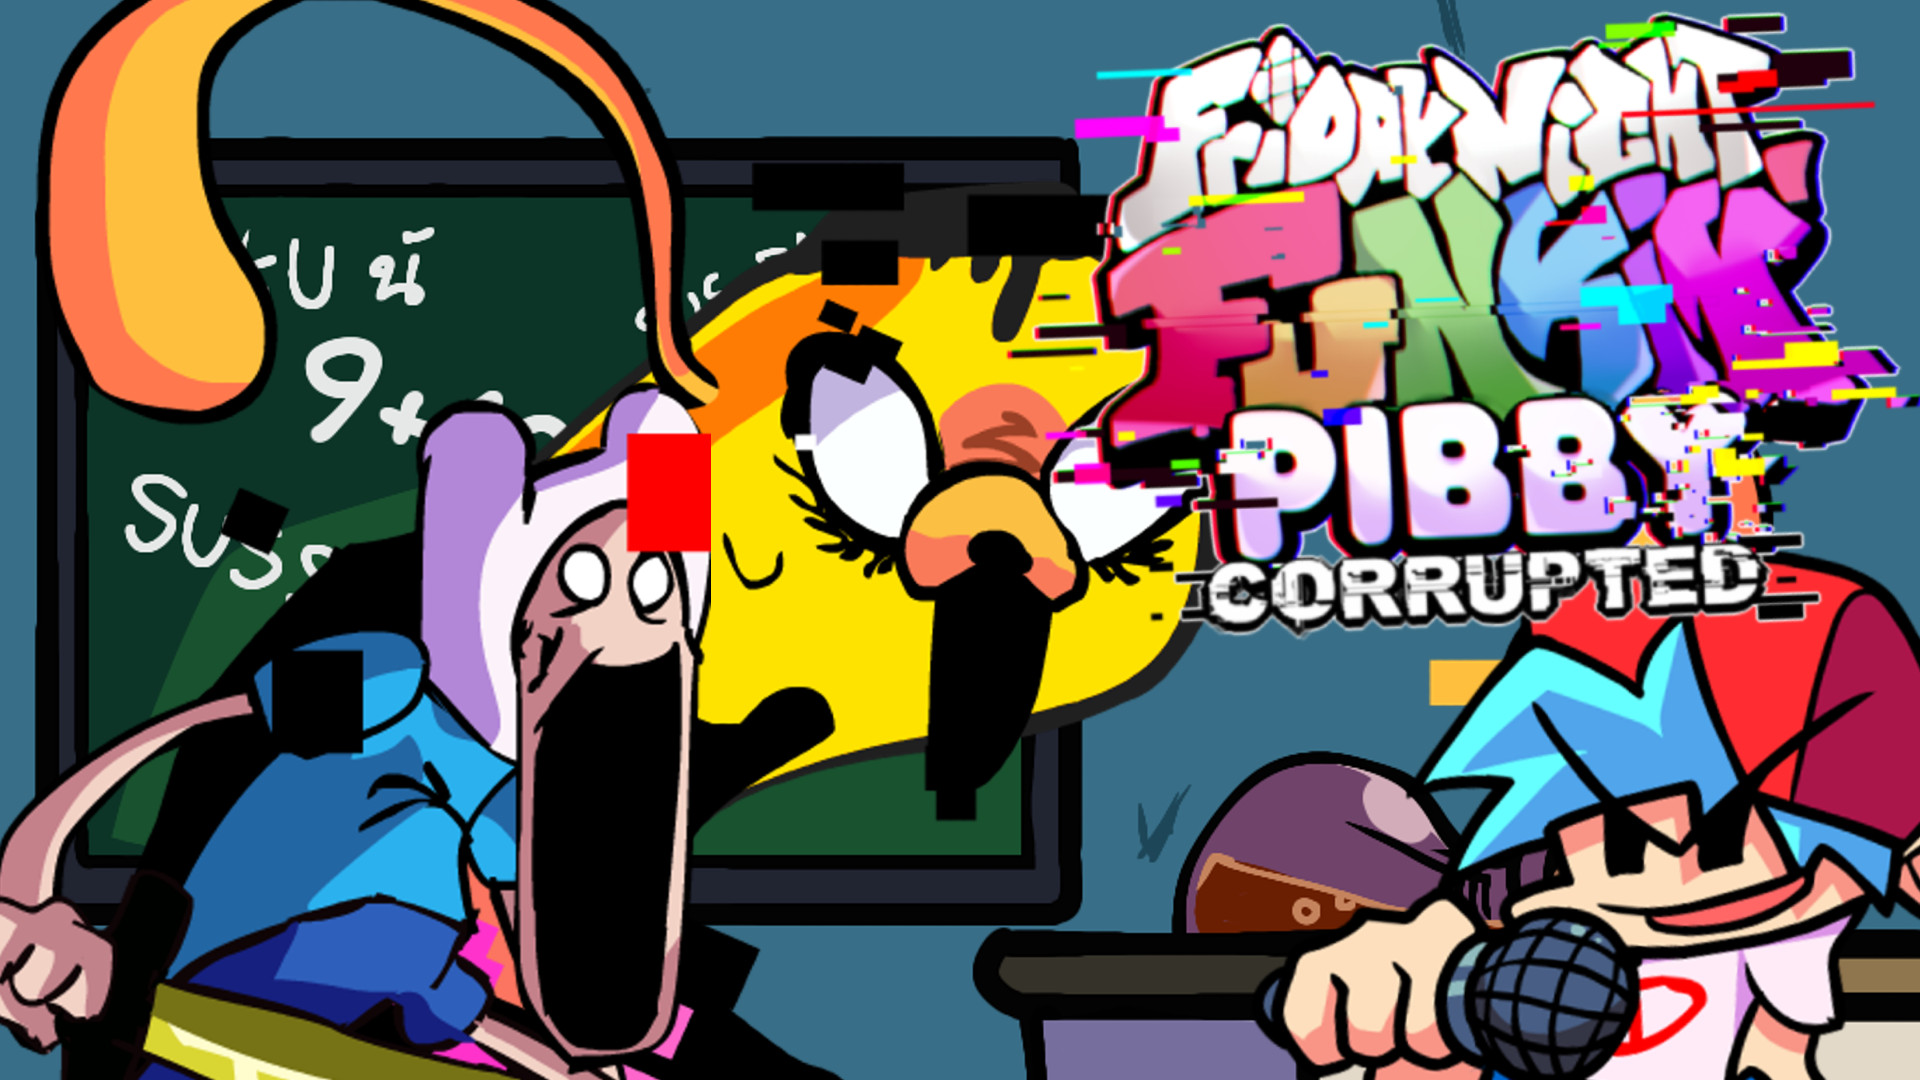 Friday Night Funkin vs Pibby Corrupted Mod /FNF x Come and Learn